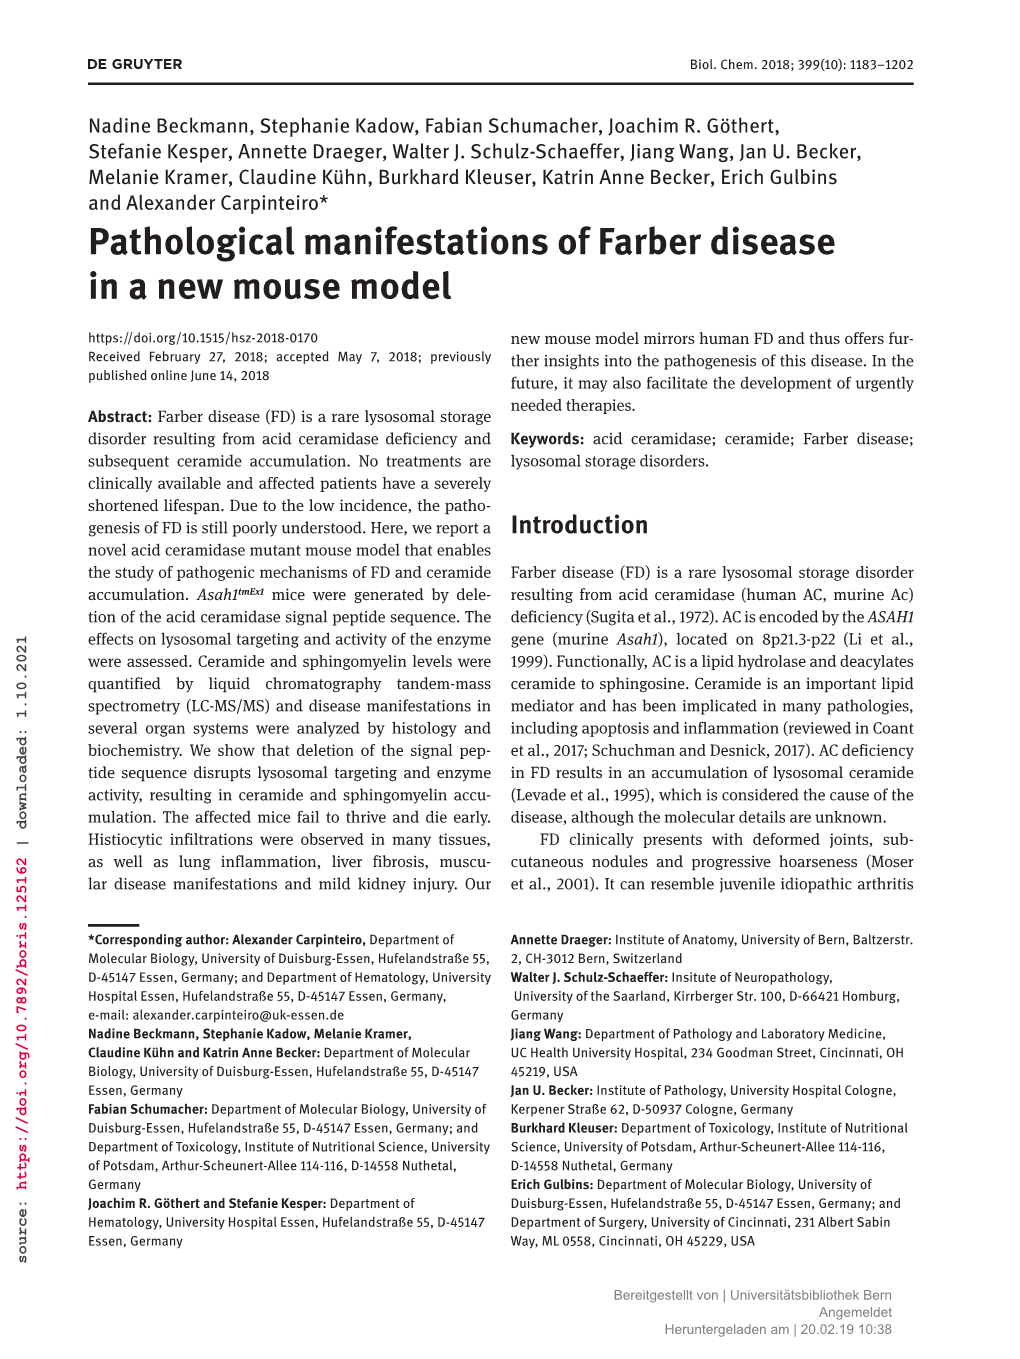 Pathological Manifestations of Farber Disease in a New Mouse Model